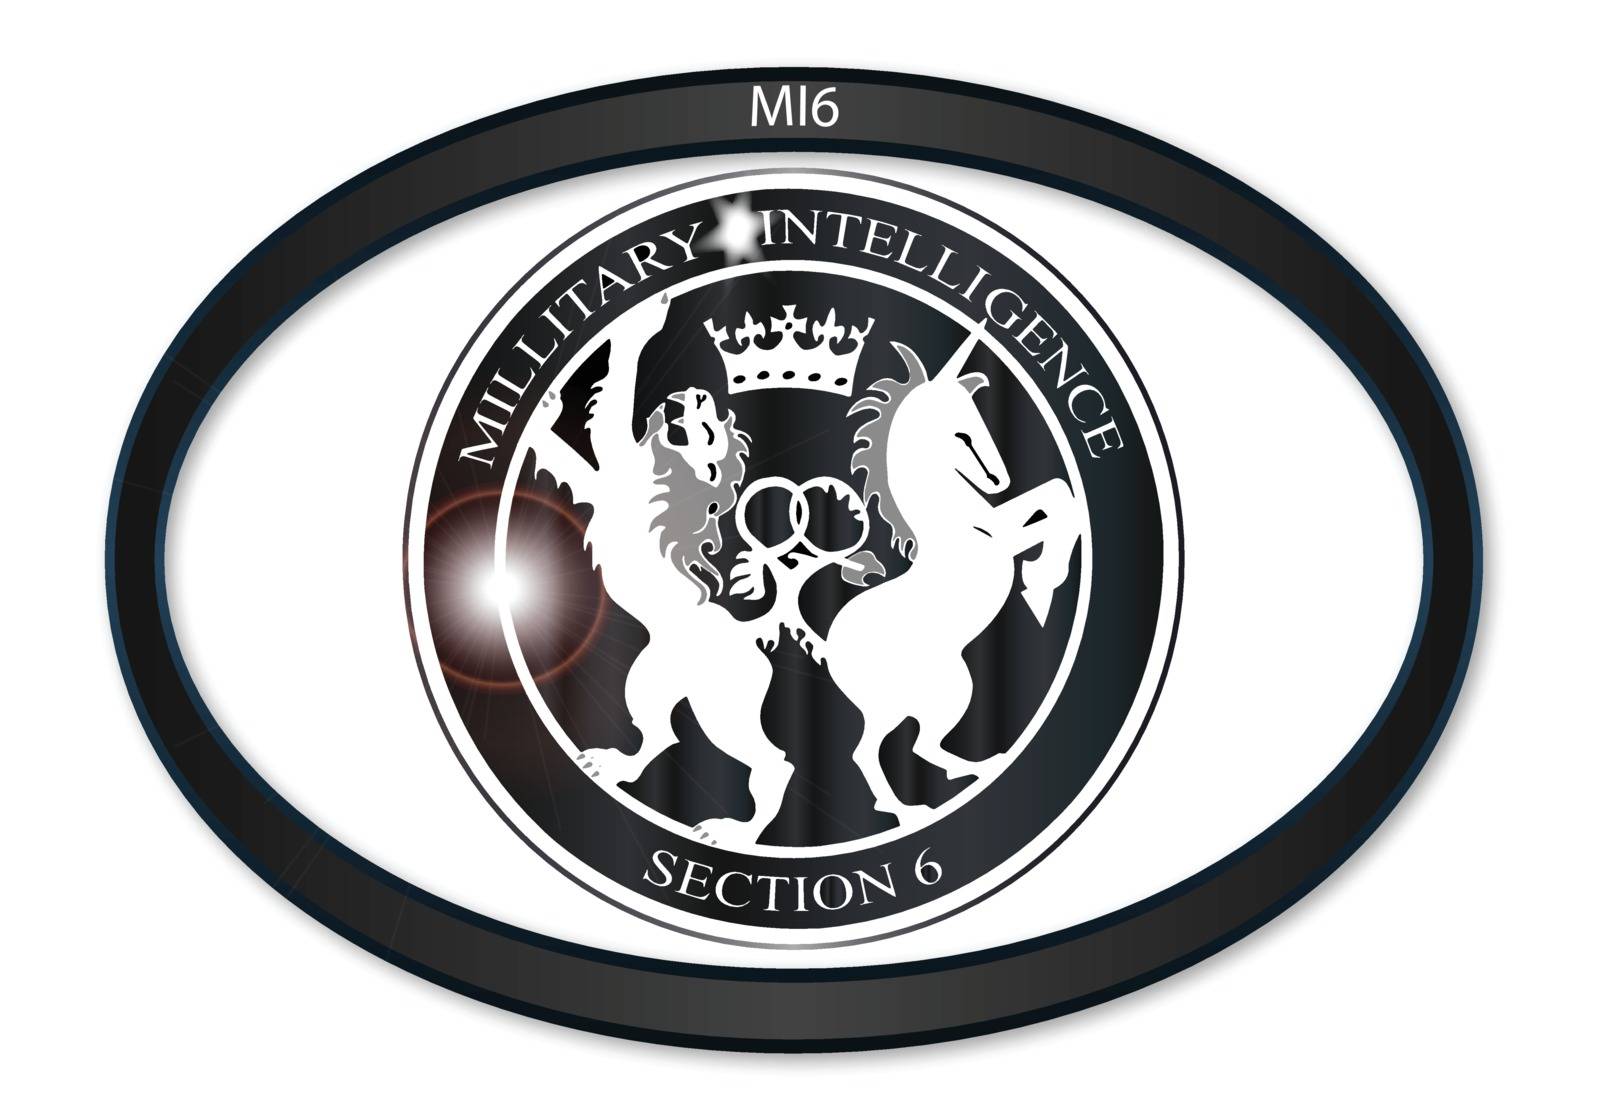 Oval metal button with a depiction of the MI6 horses